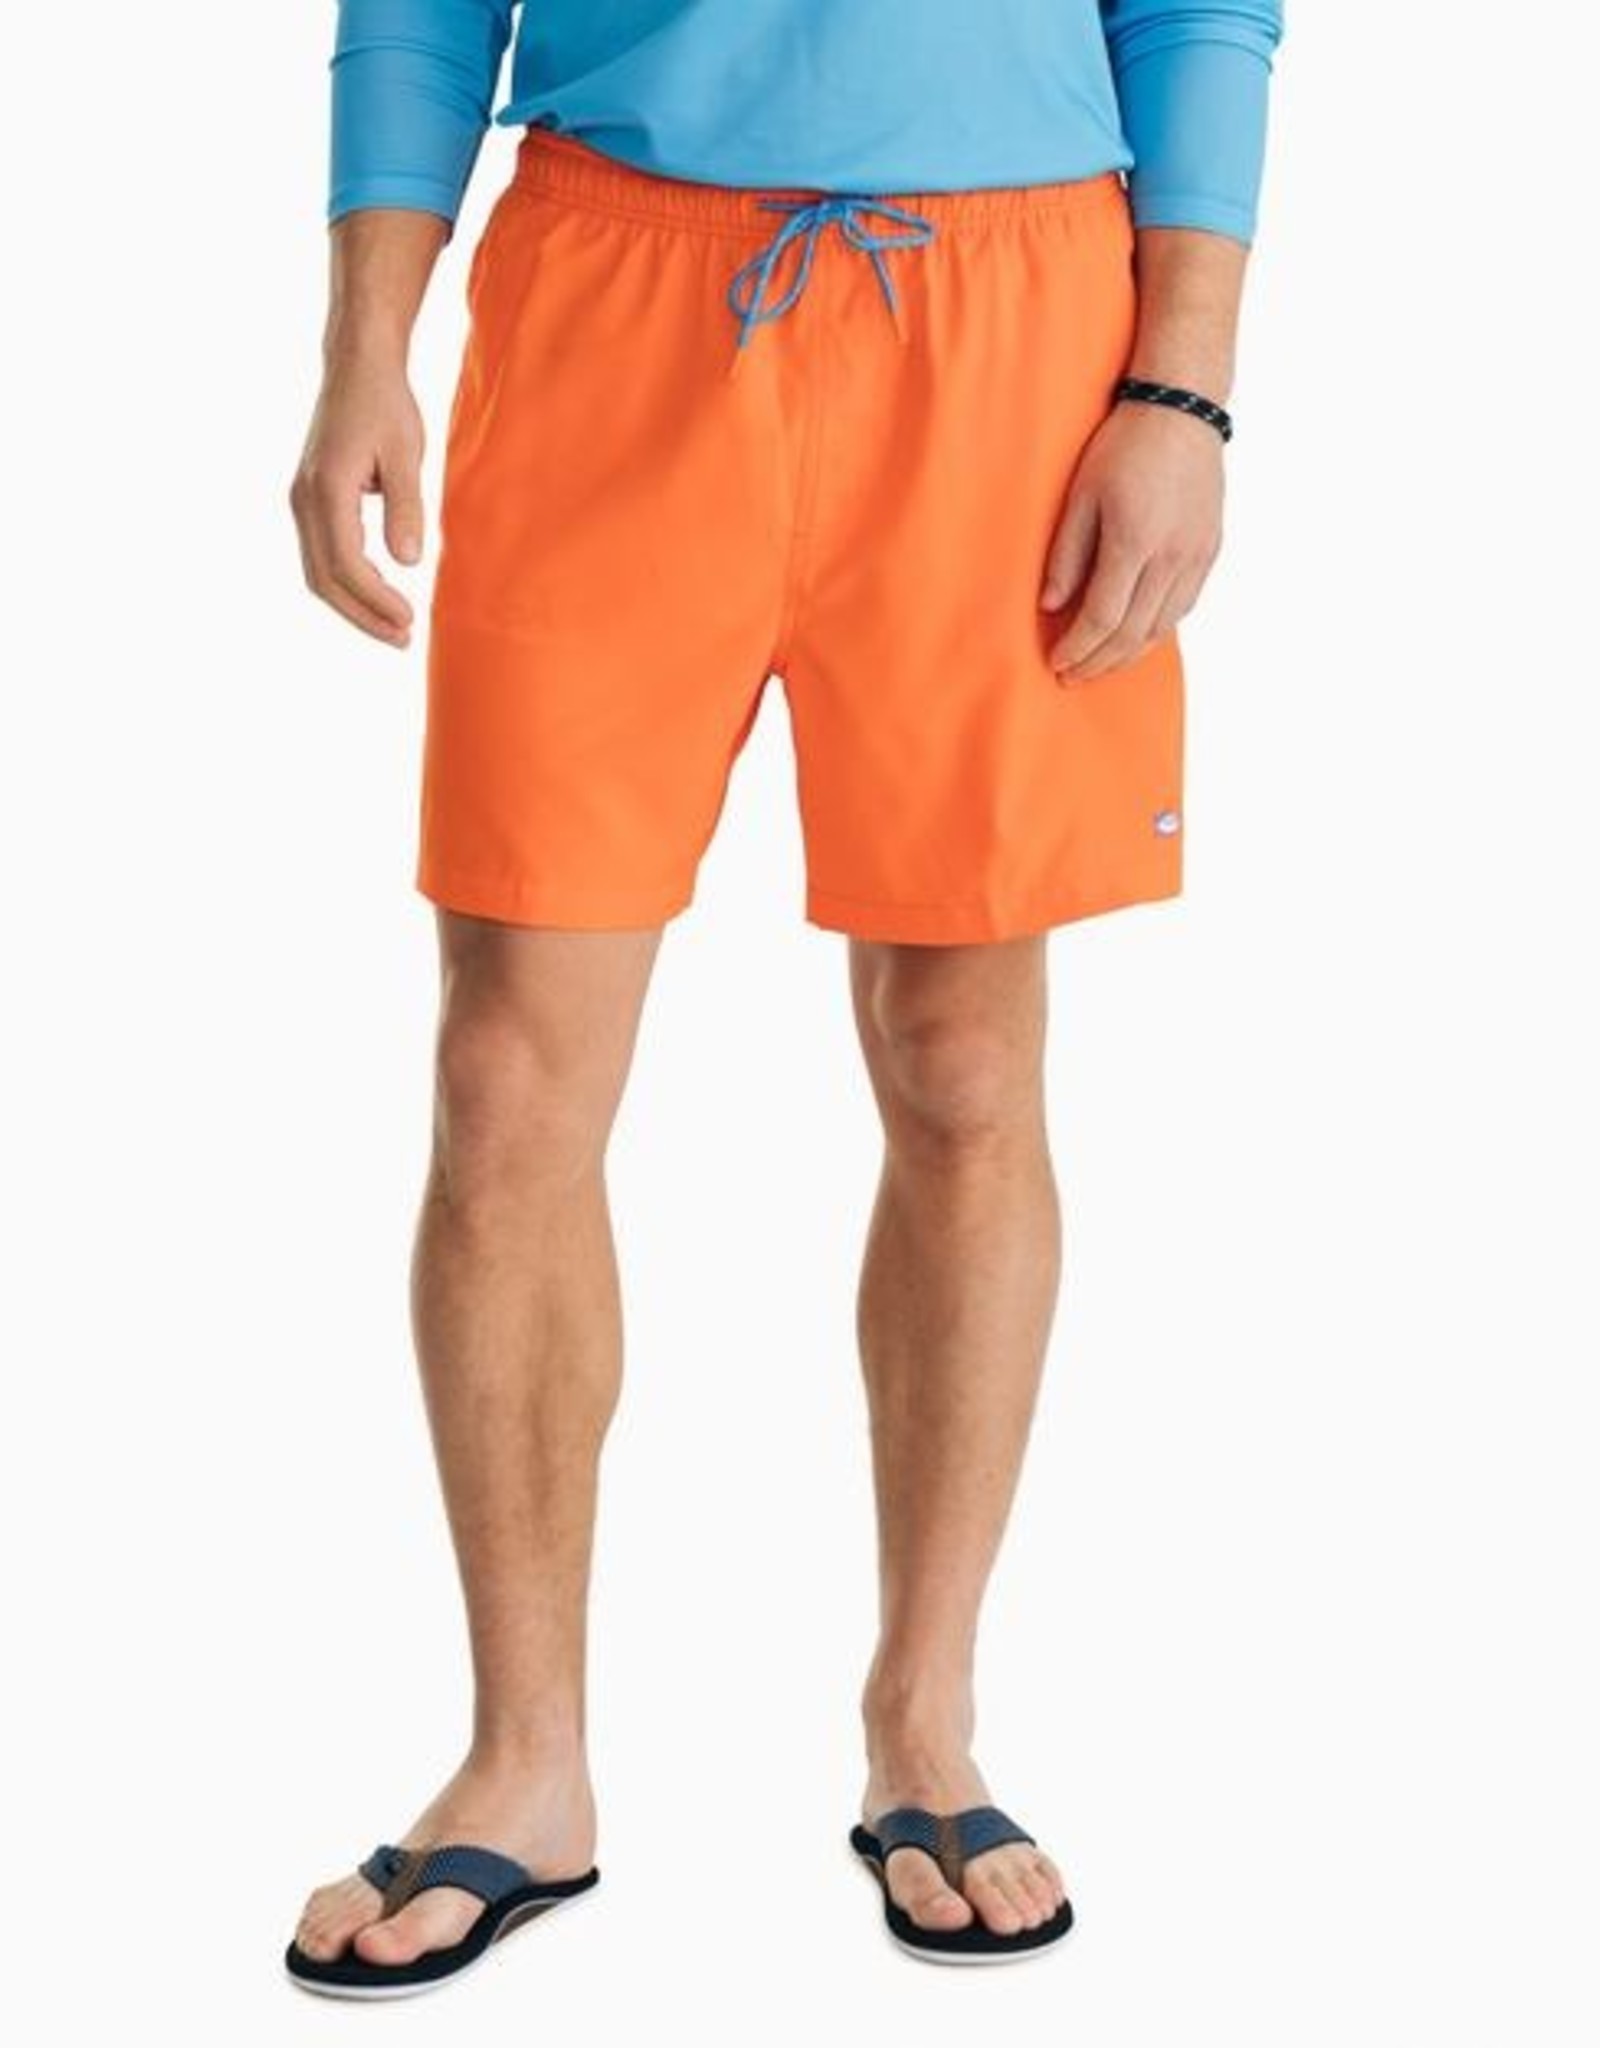 Southern Tide Solid Swim Trunk